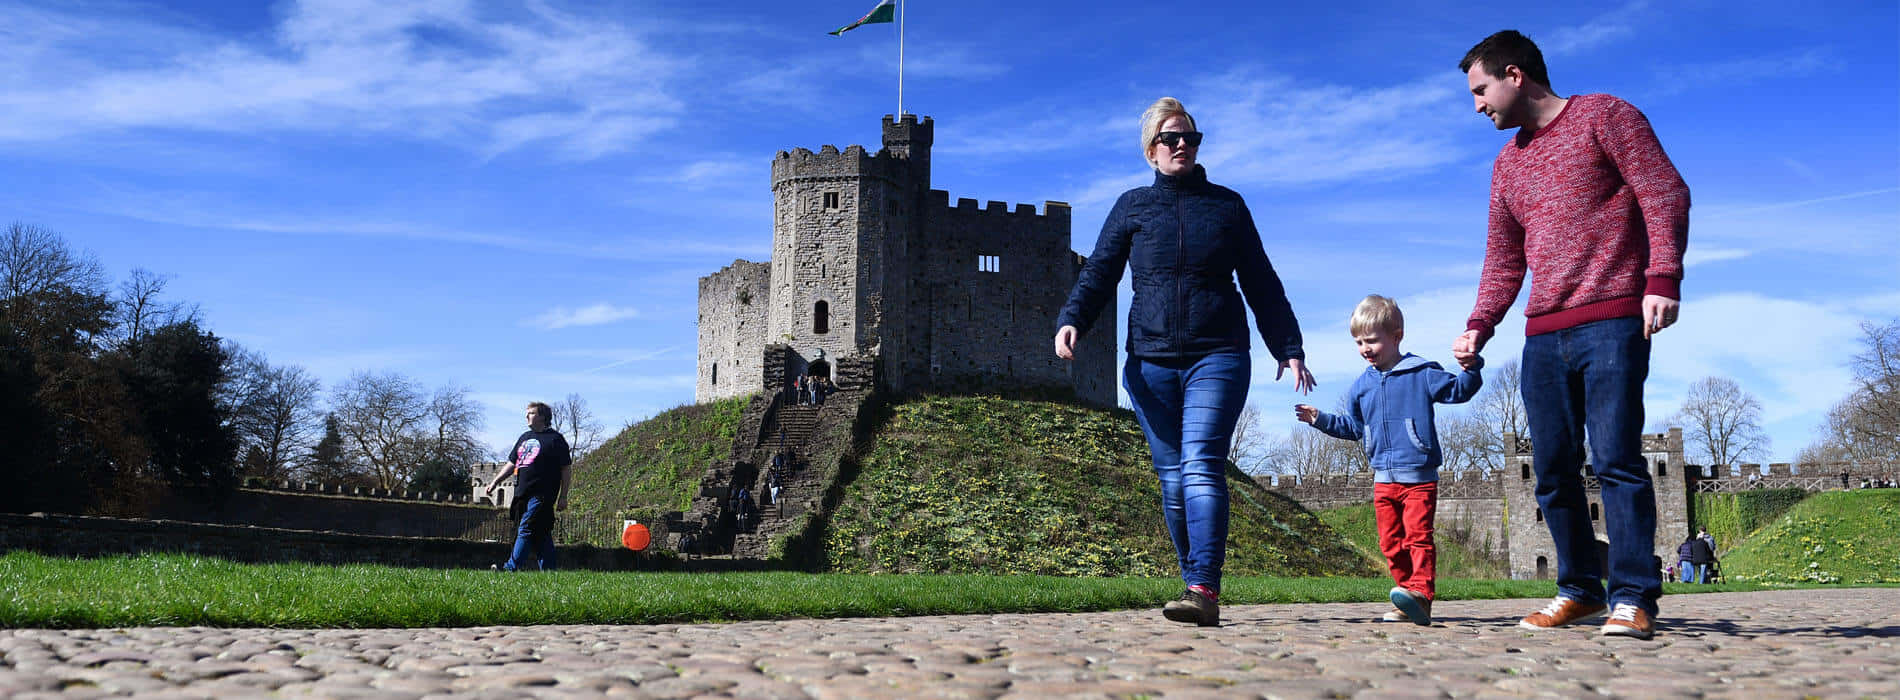 Family At Cardiff Castle Cover Wallpaper